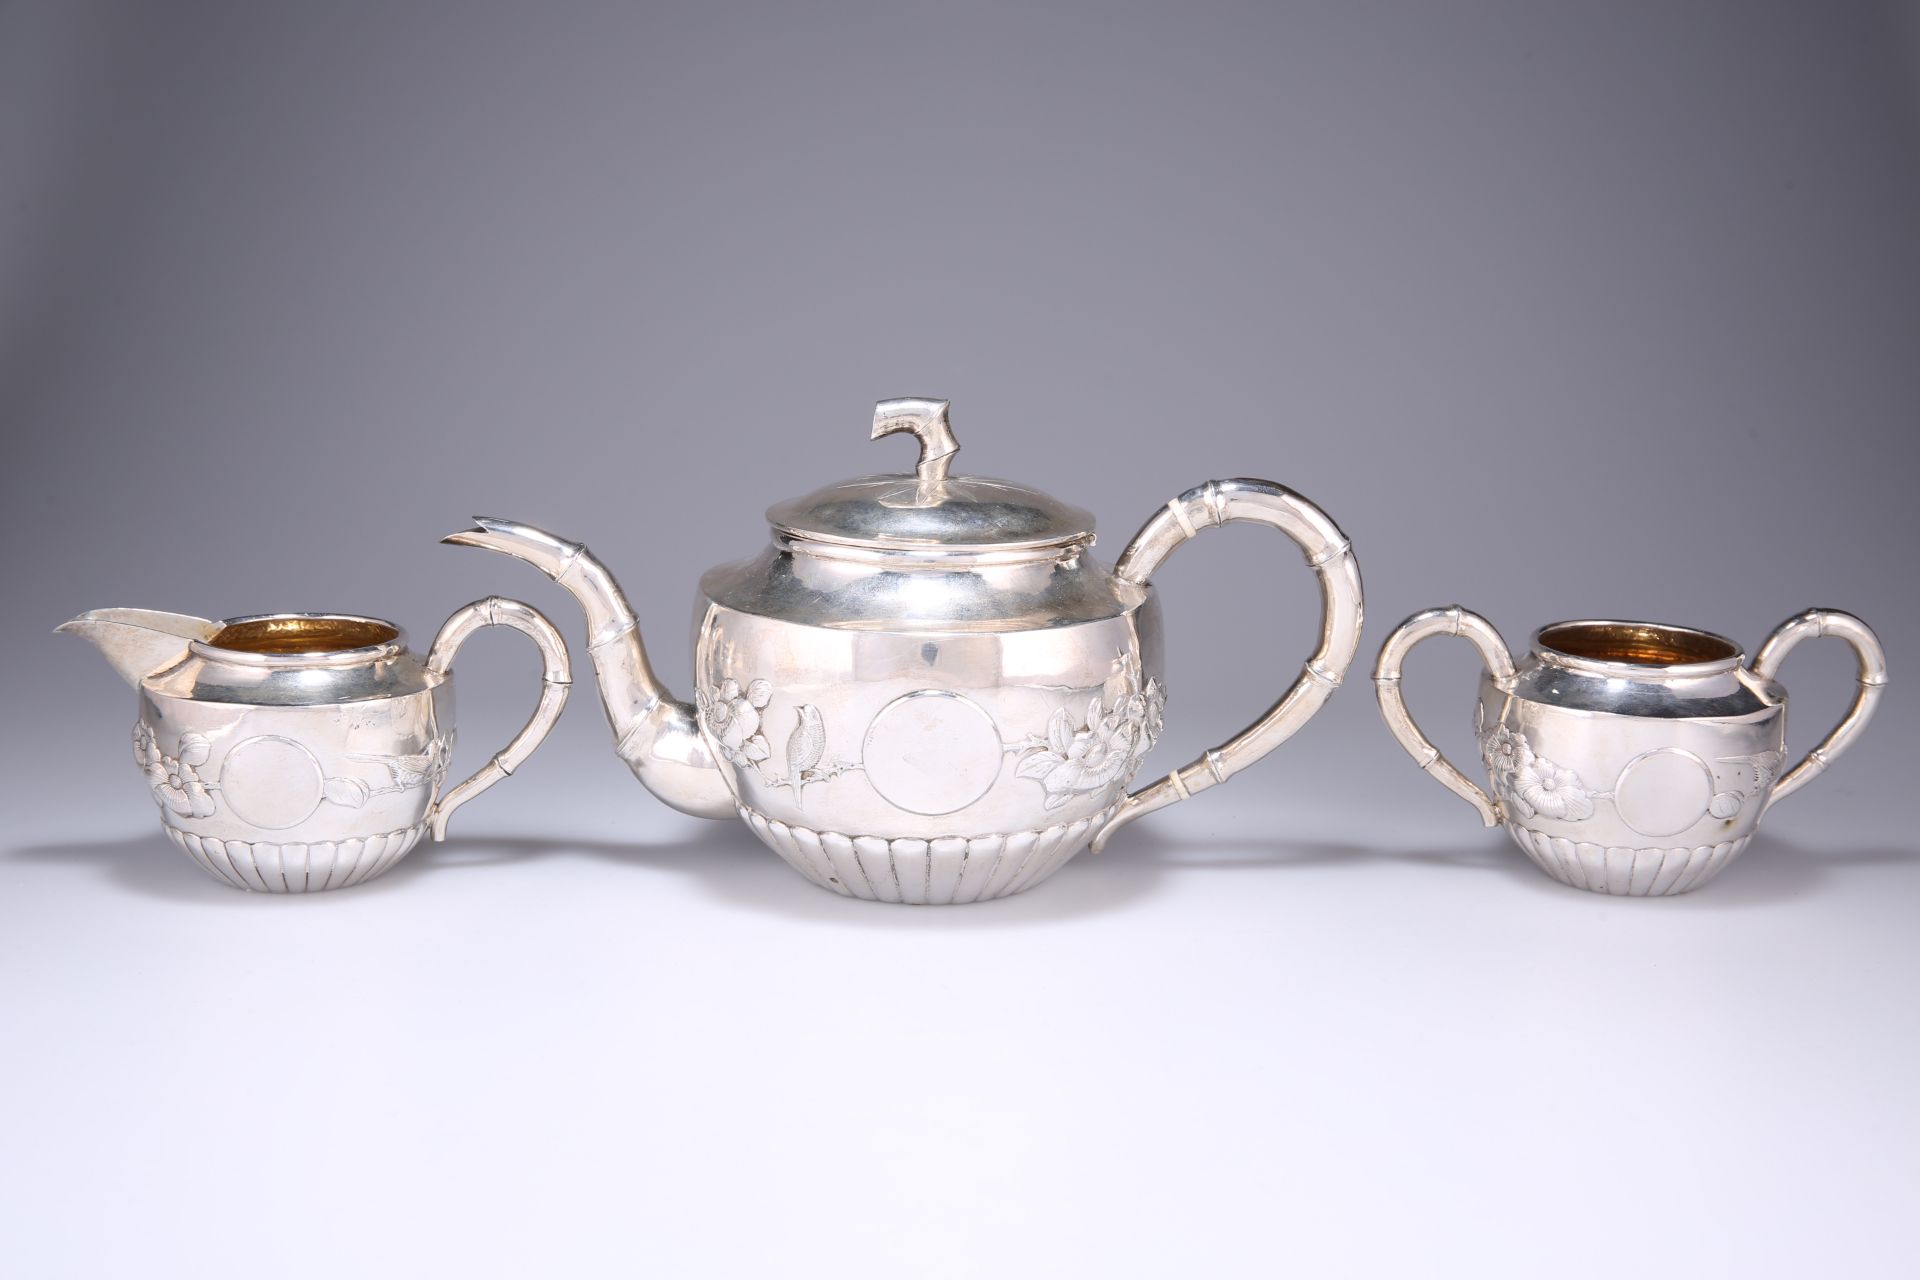 A FINE CHINESE EXPORT SILVER THREE-PIECE TEA SERVICE, EARLY 20TH CENTURY